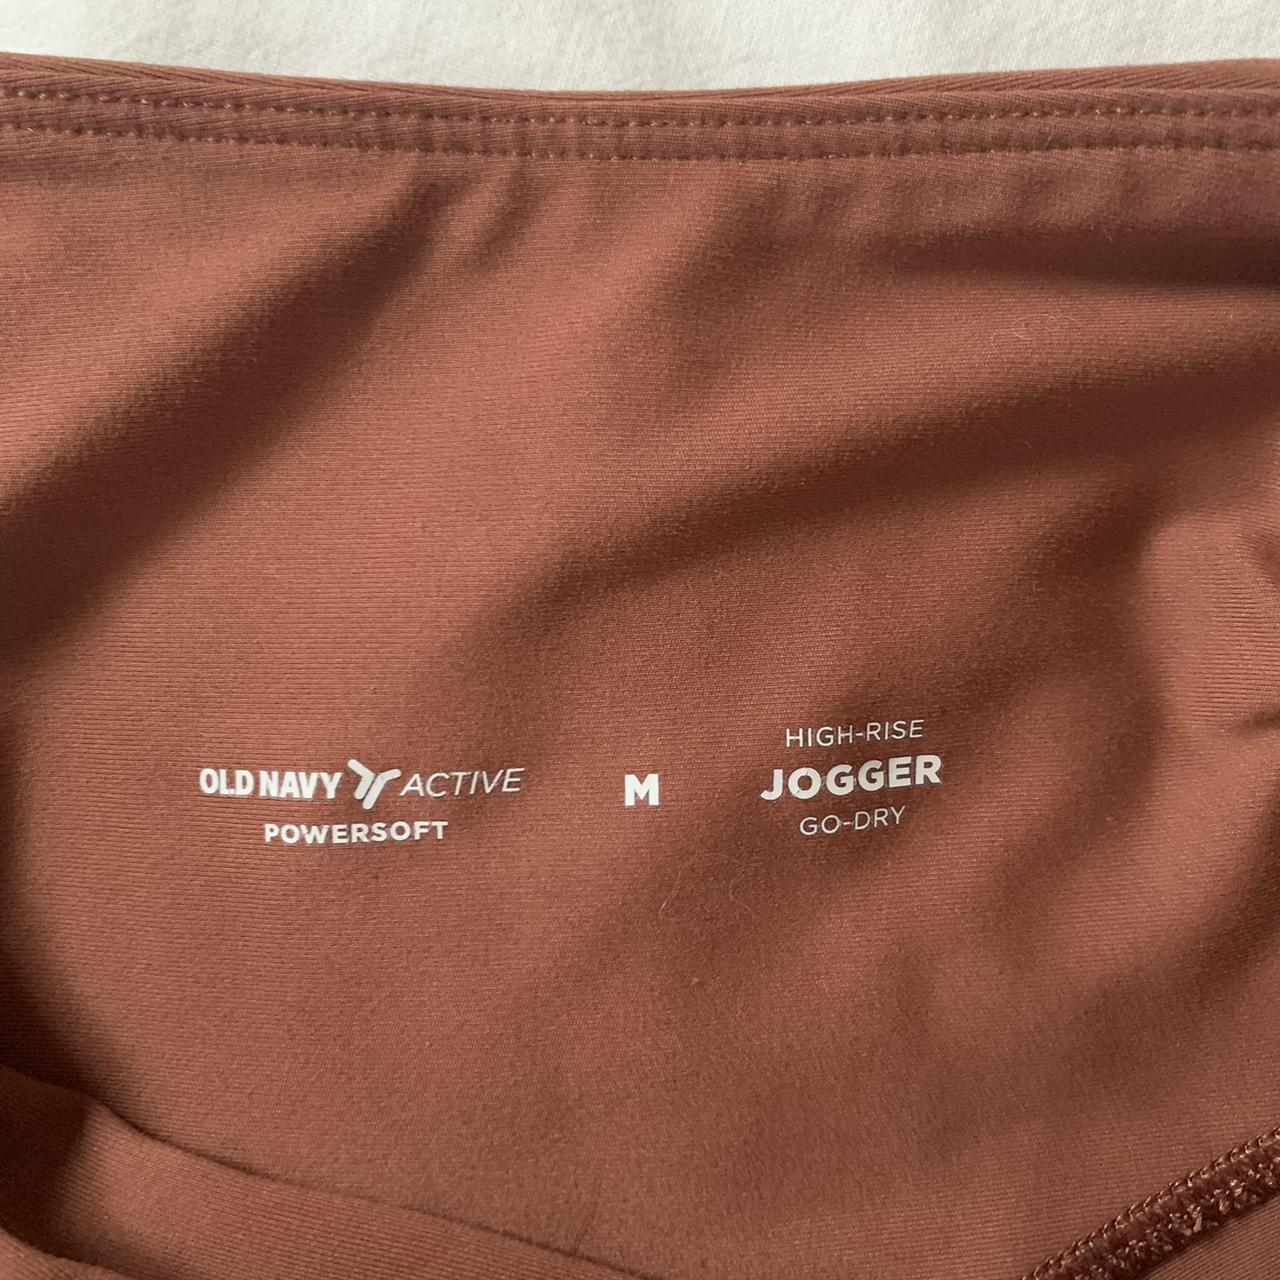 High-rise joggers / old navy active powersoft joggers - Depop